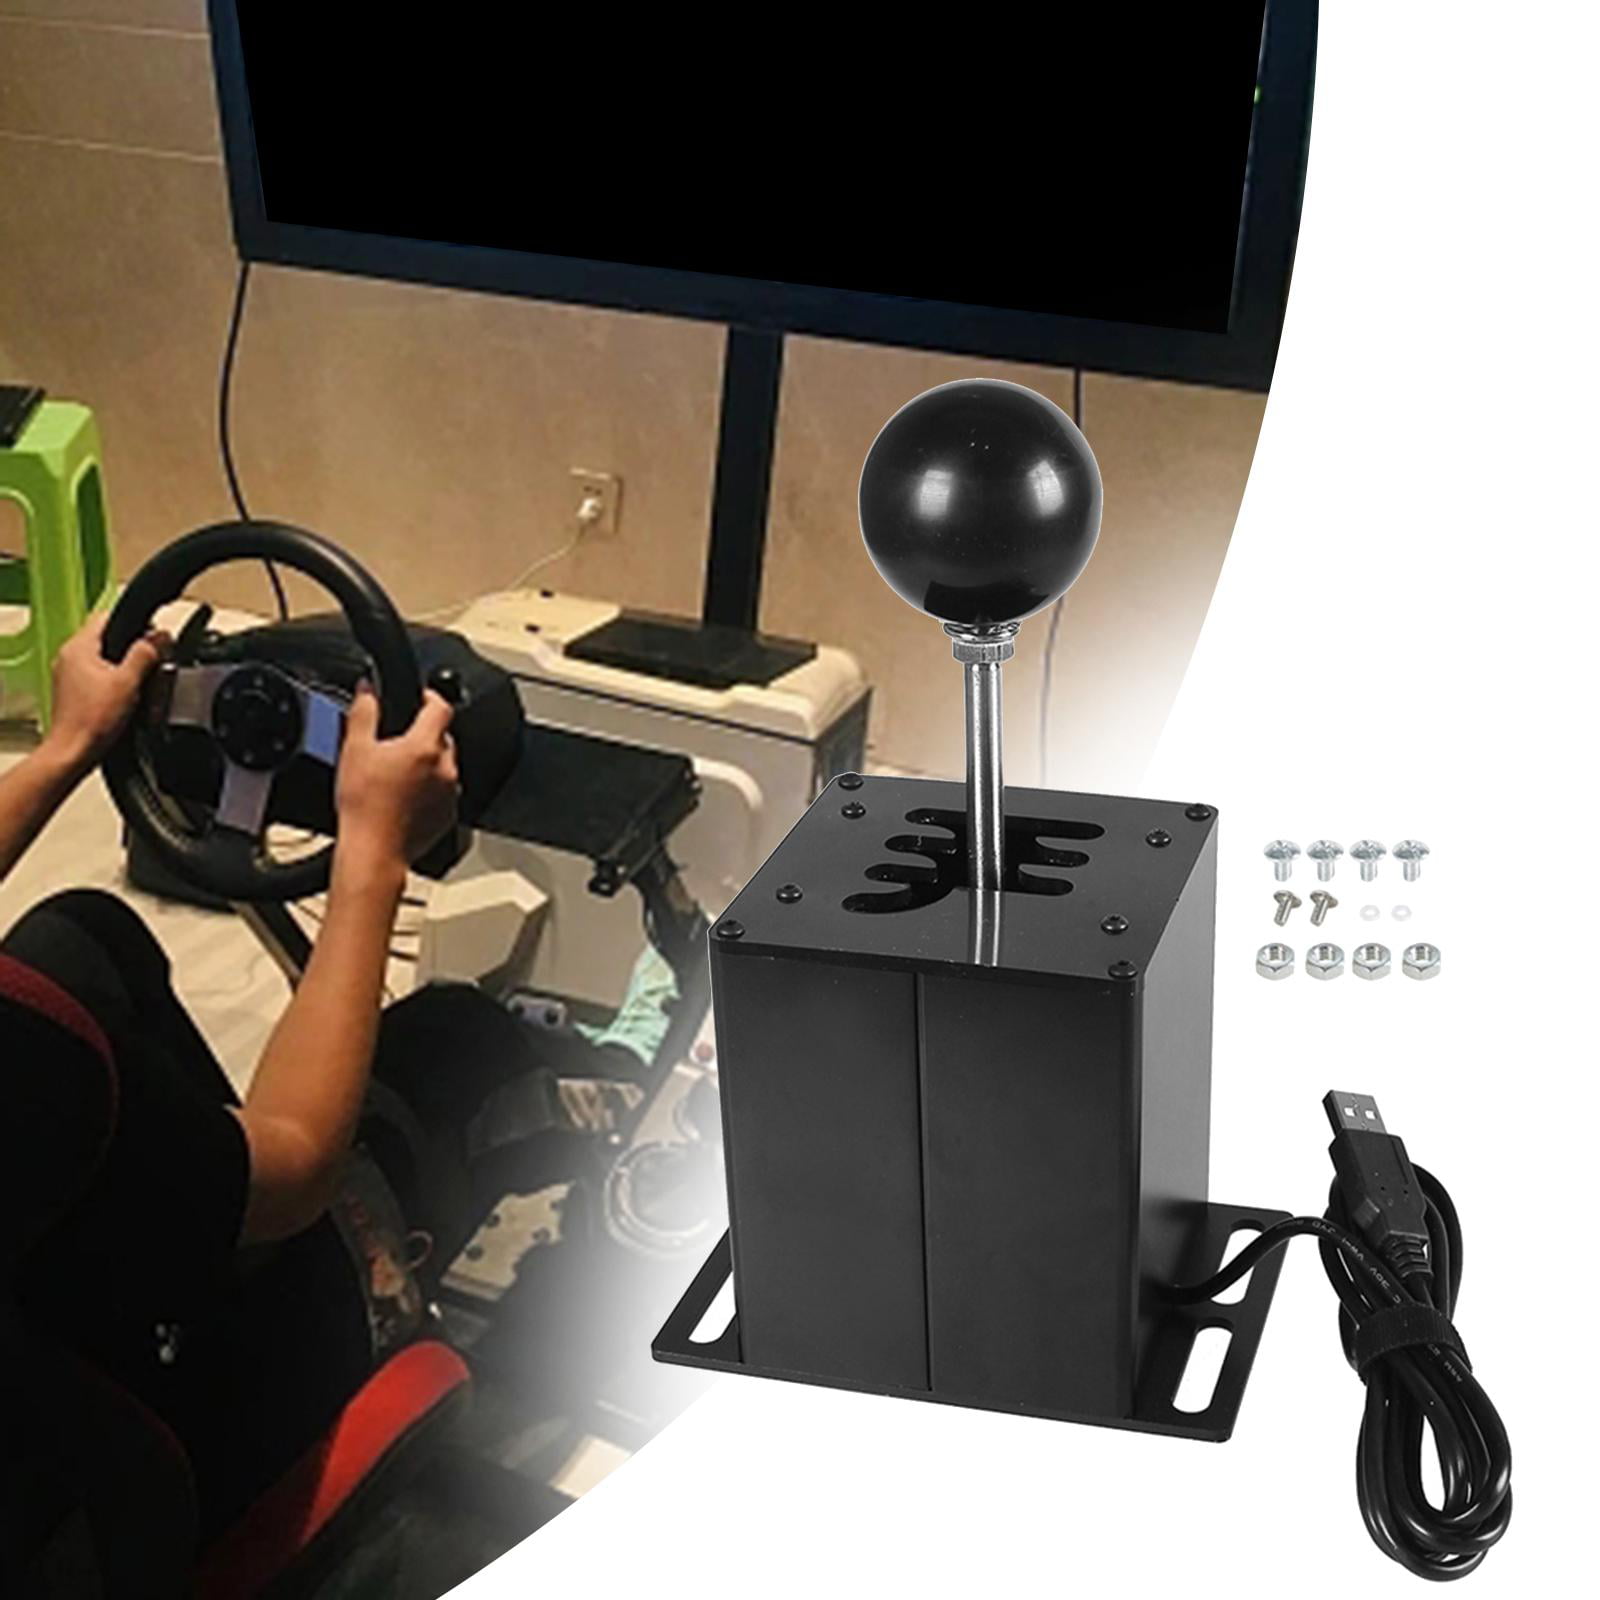 H Gear Shifter Sim Racing Games Replaces USB Racing Shifter for T300 G25 7  Gear black